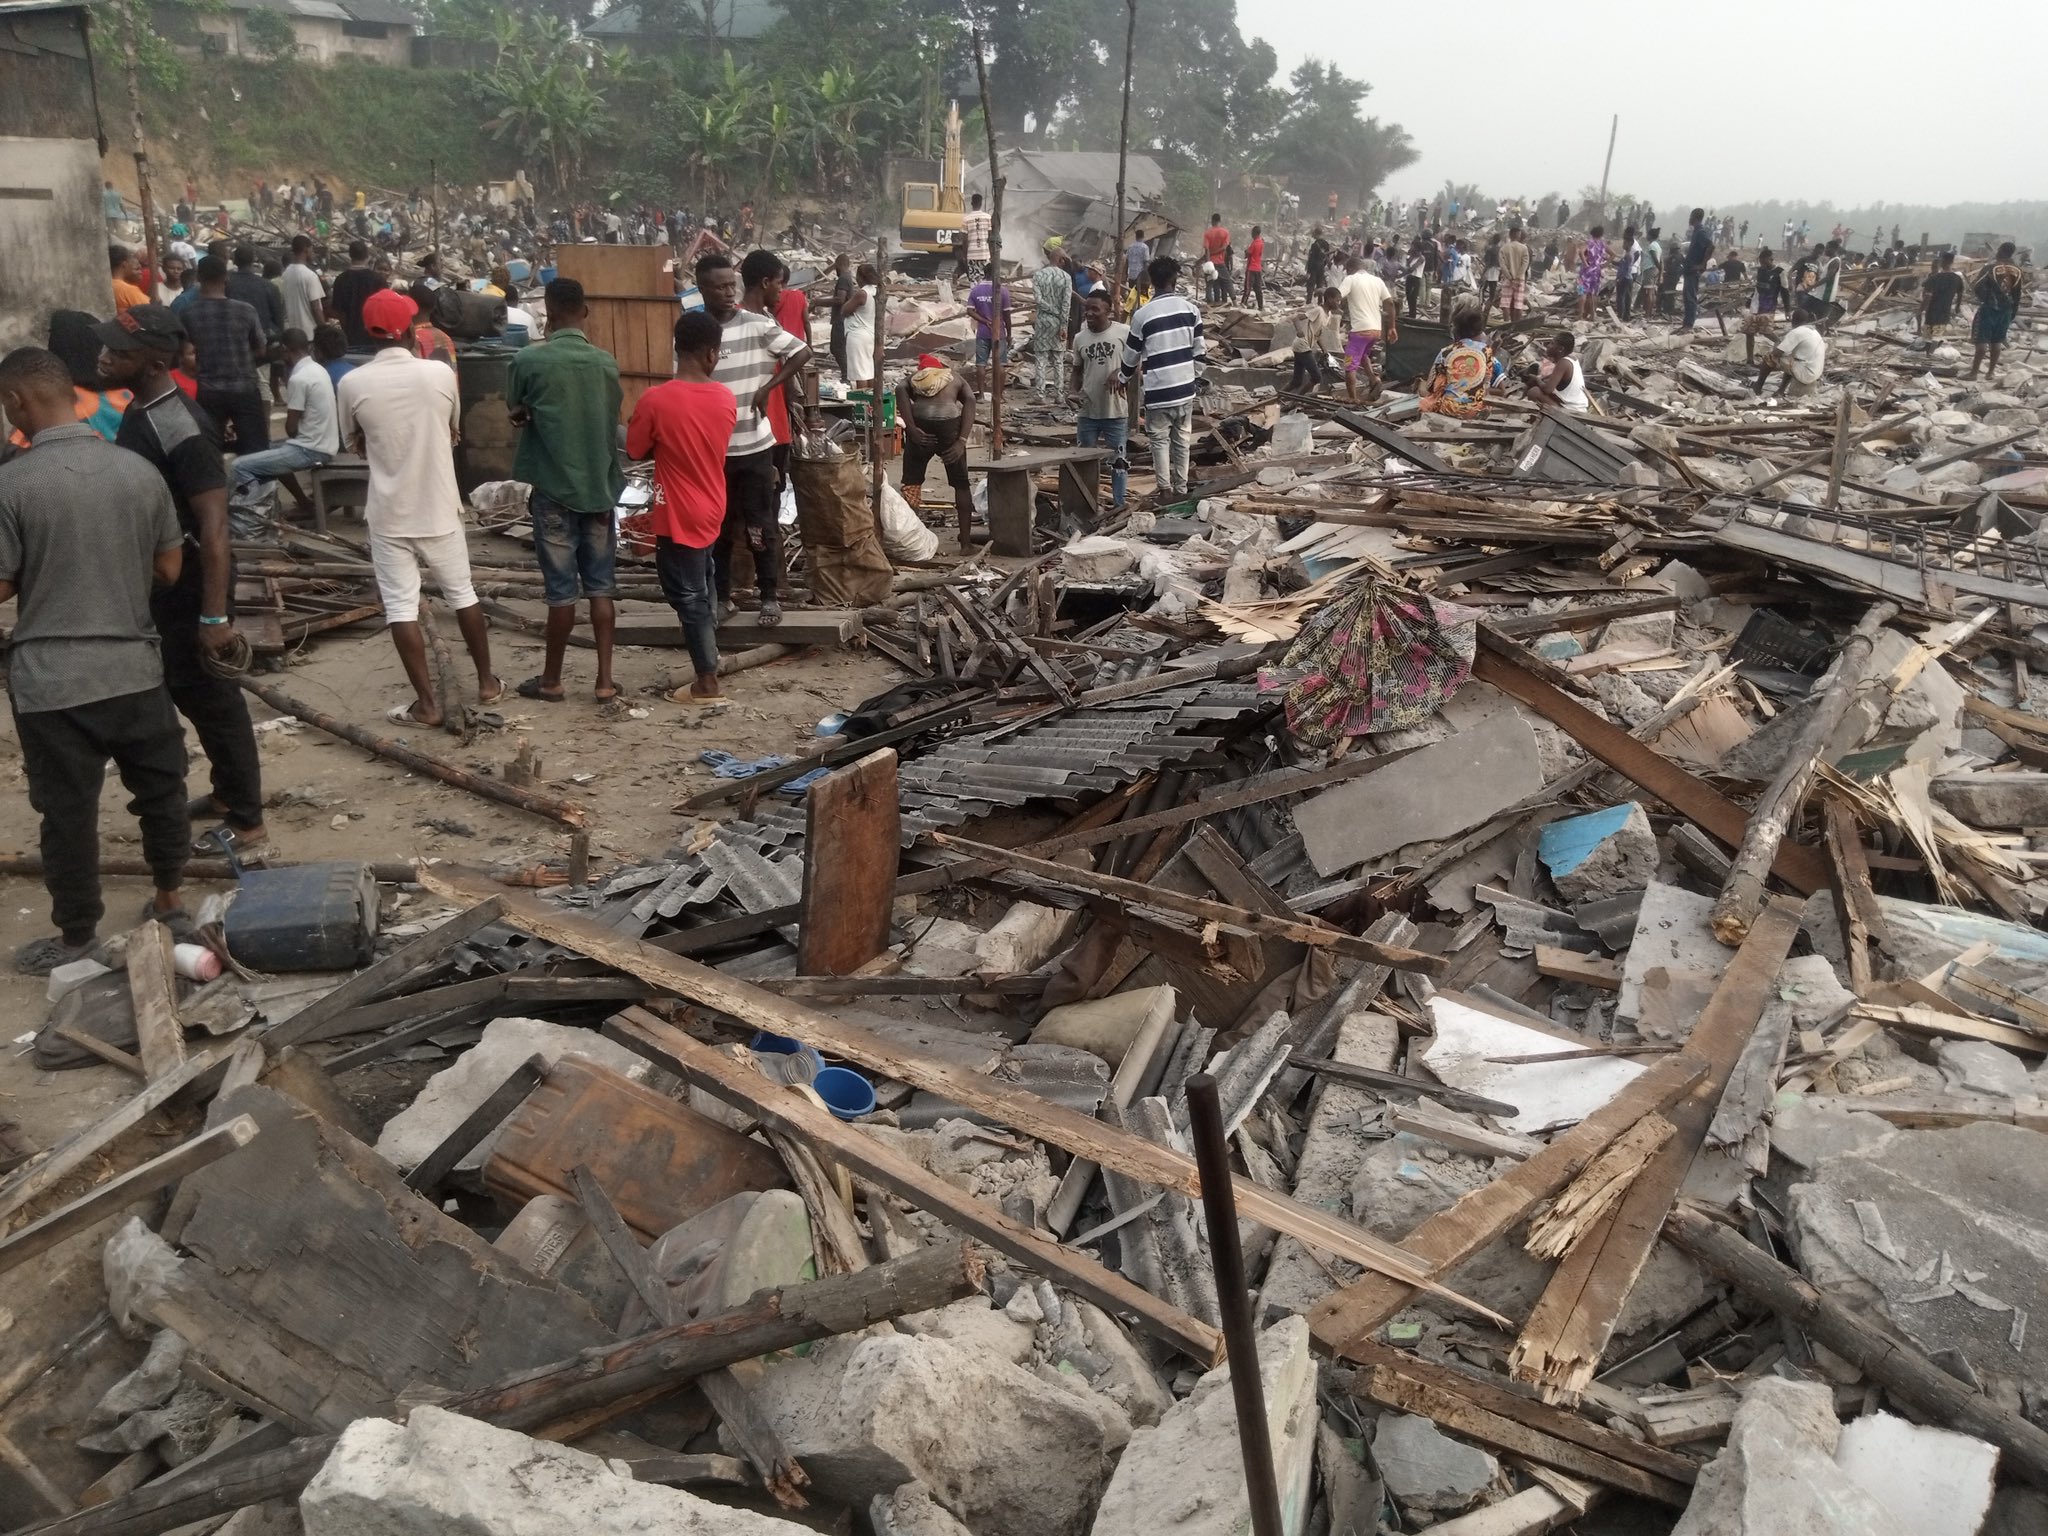 Amnesty International, Others Condemn Ongoing Forced Eviction Of Communities In Port Harcourt